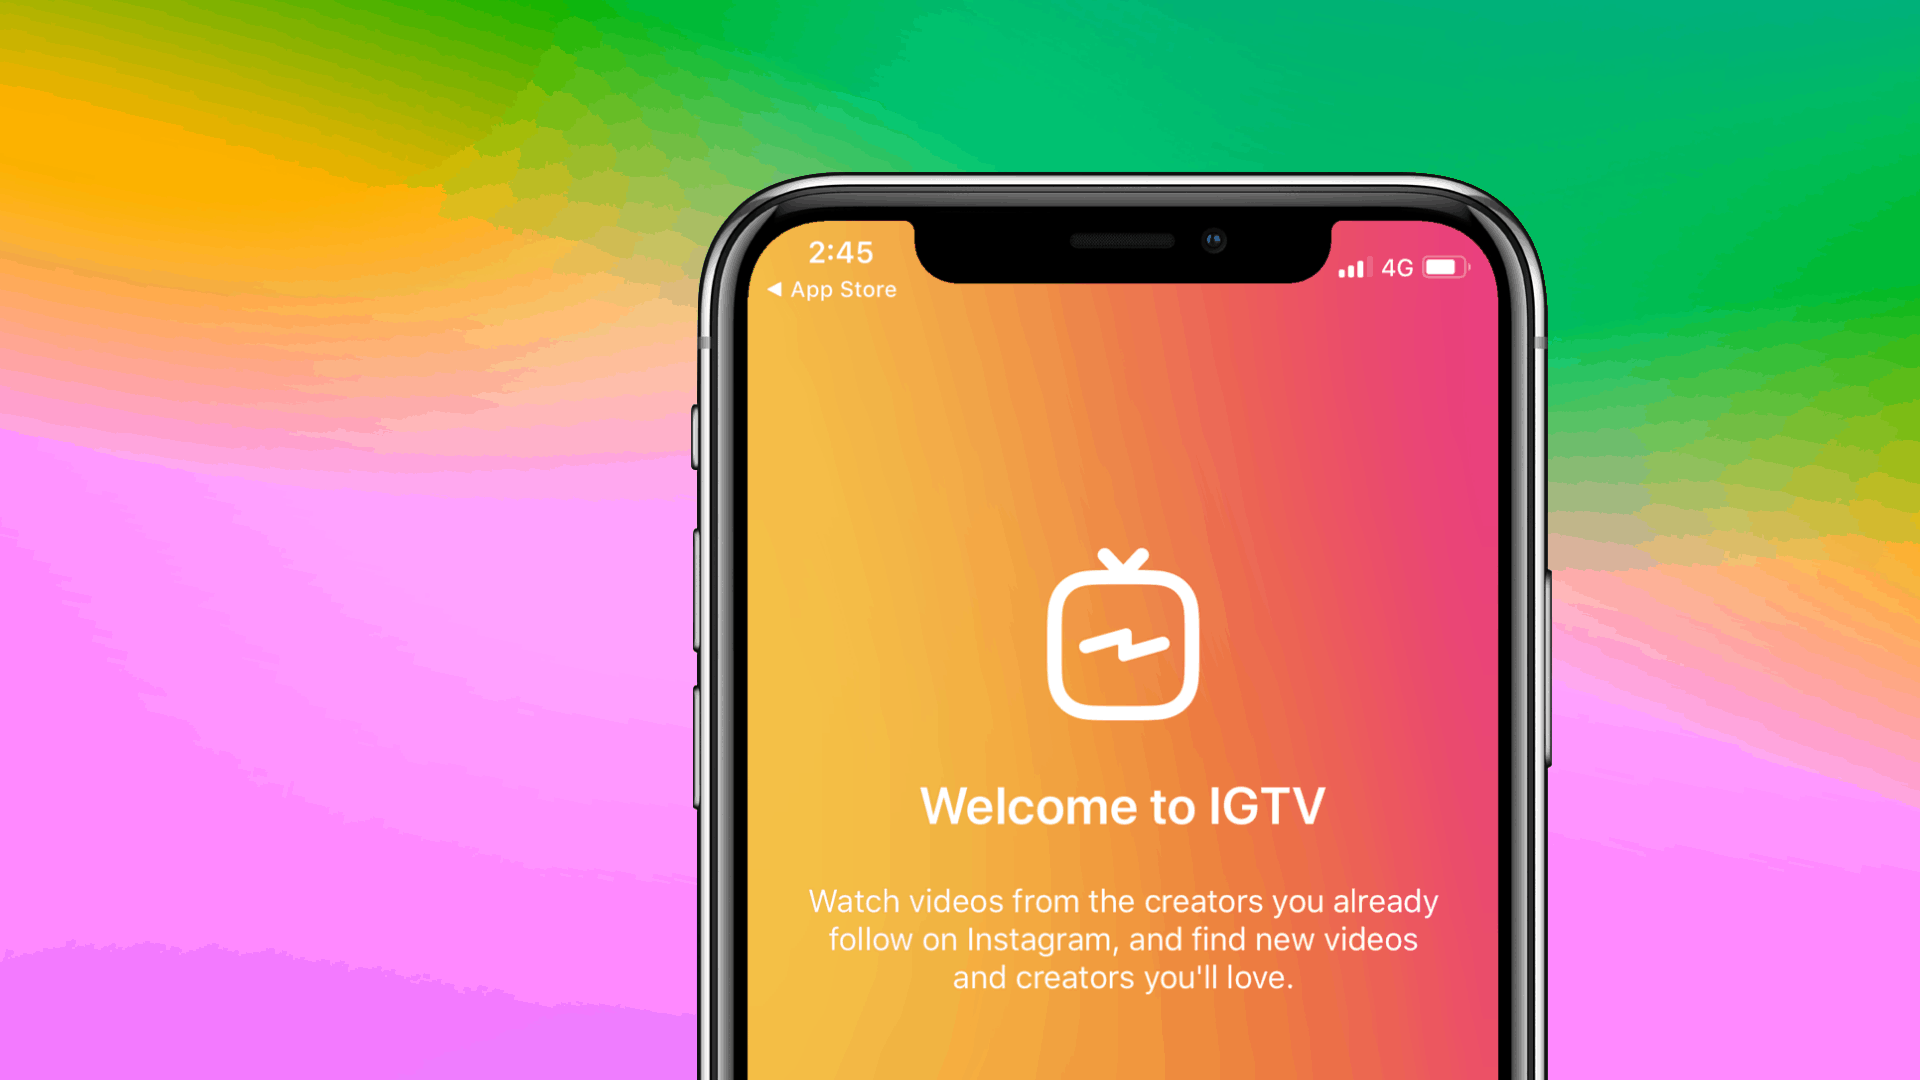 How to get IGTV